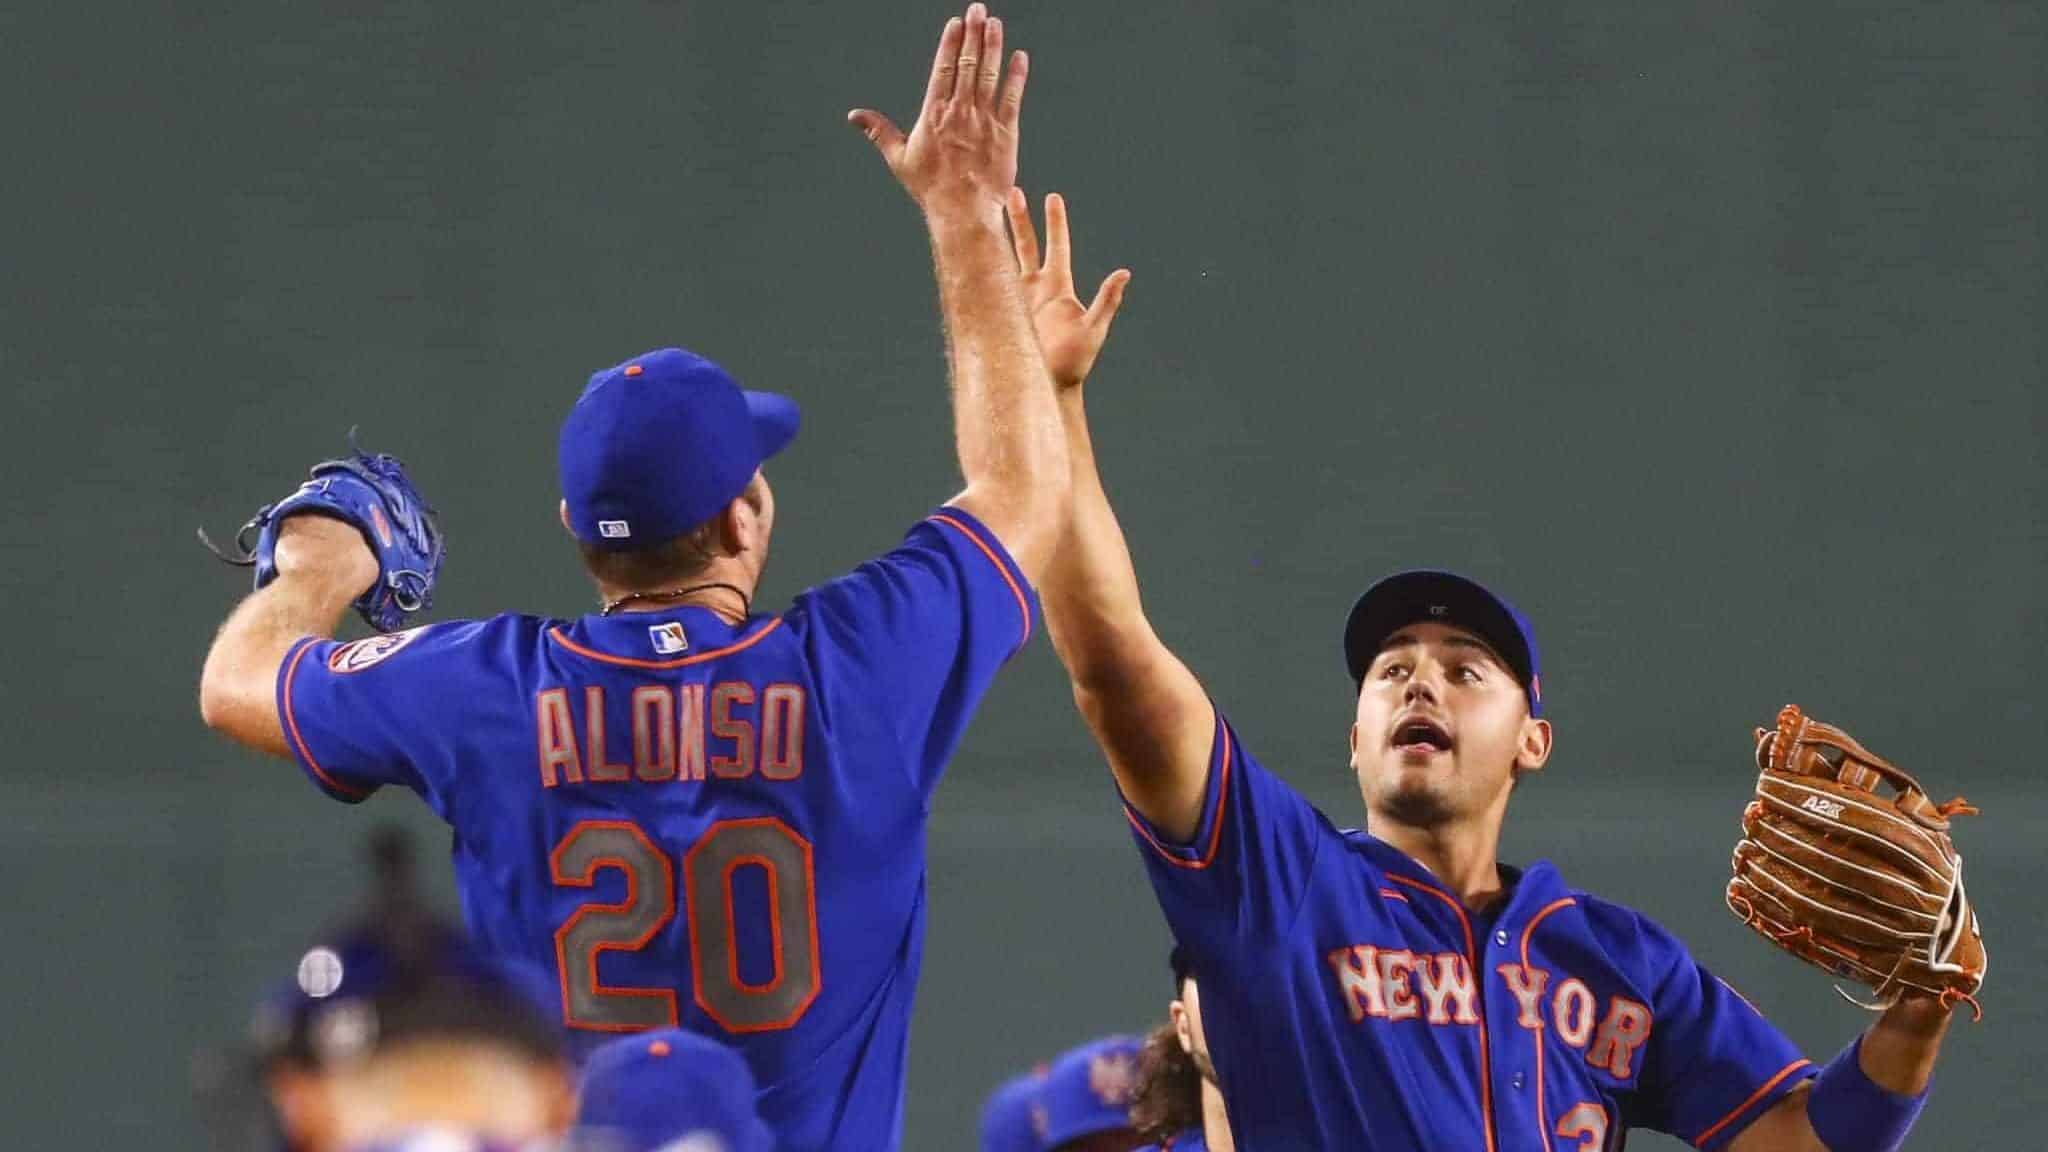 BOSTON, MA - JULY 28: Pete Alonso #20 of the New York Mets high fives Michael Conforto #30 after a victory over the Boston Red Sox at Fenway Park on July 28, 2020 in Boston, Massachusetts.